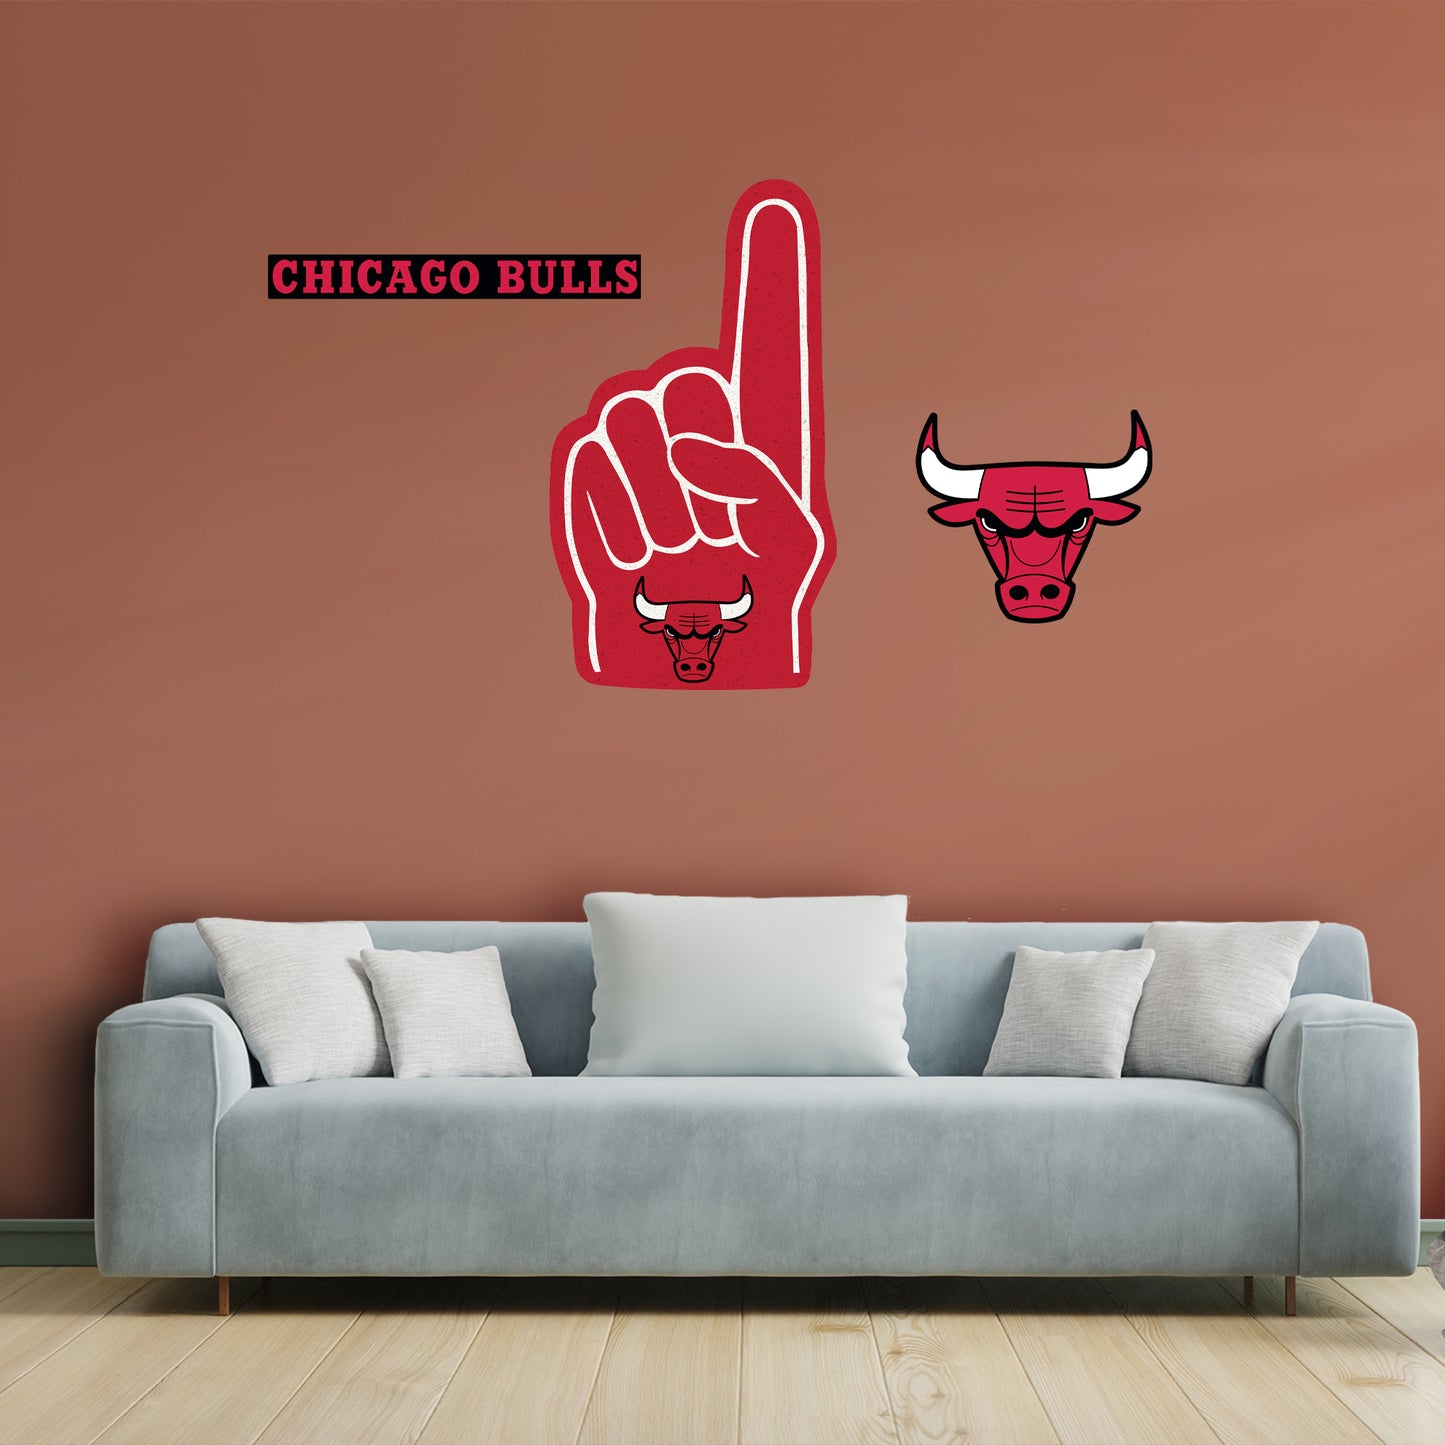 Chicago Bulls: Foam Finger - Officially Licensed NBA Removable Adhesive Decal